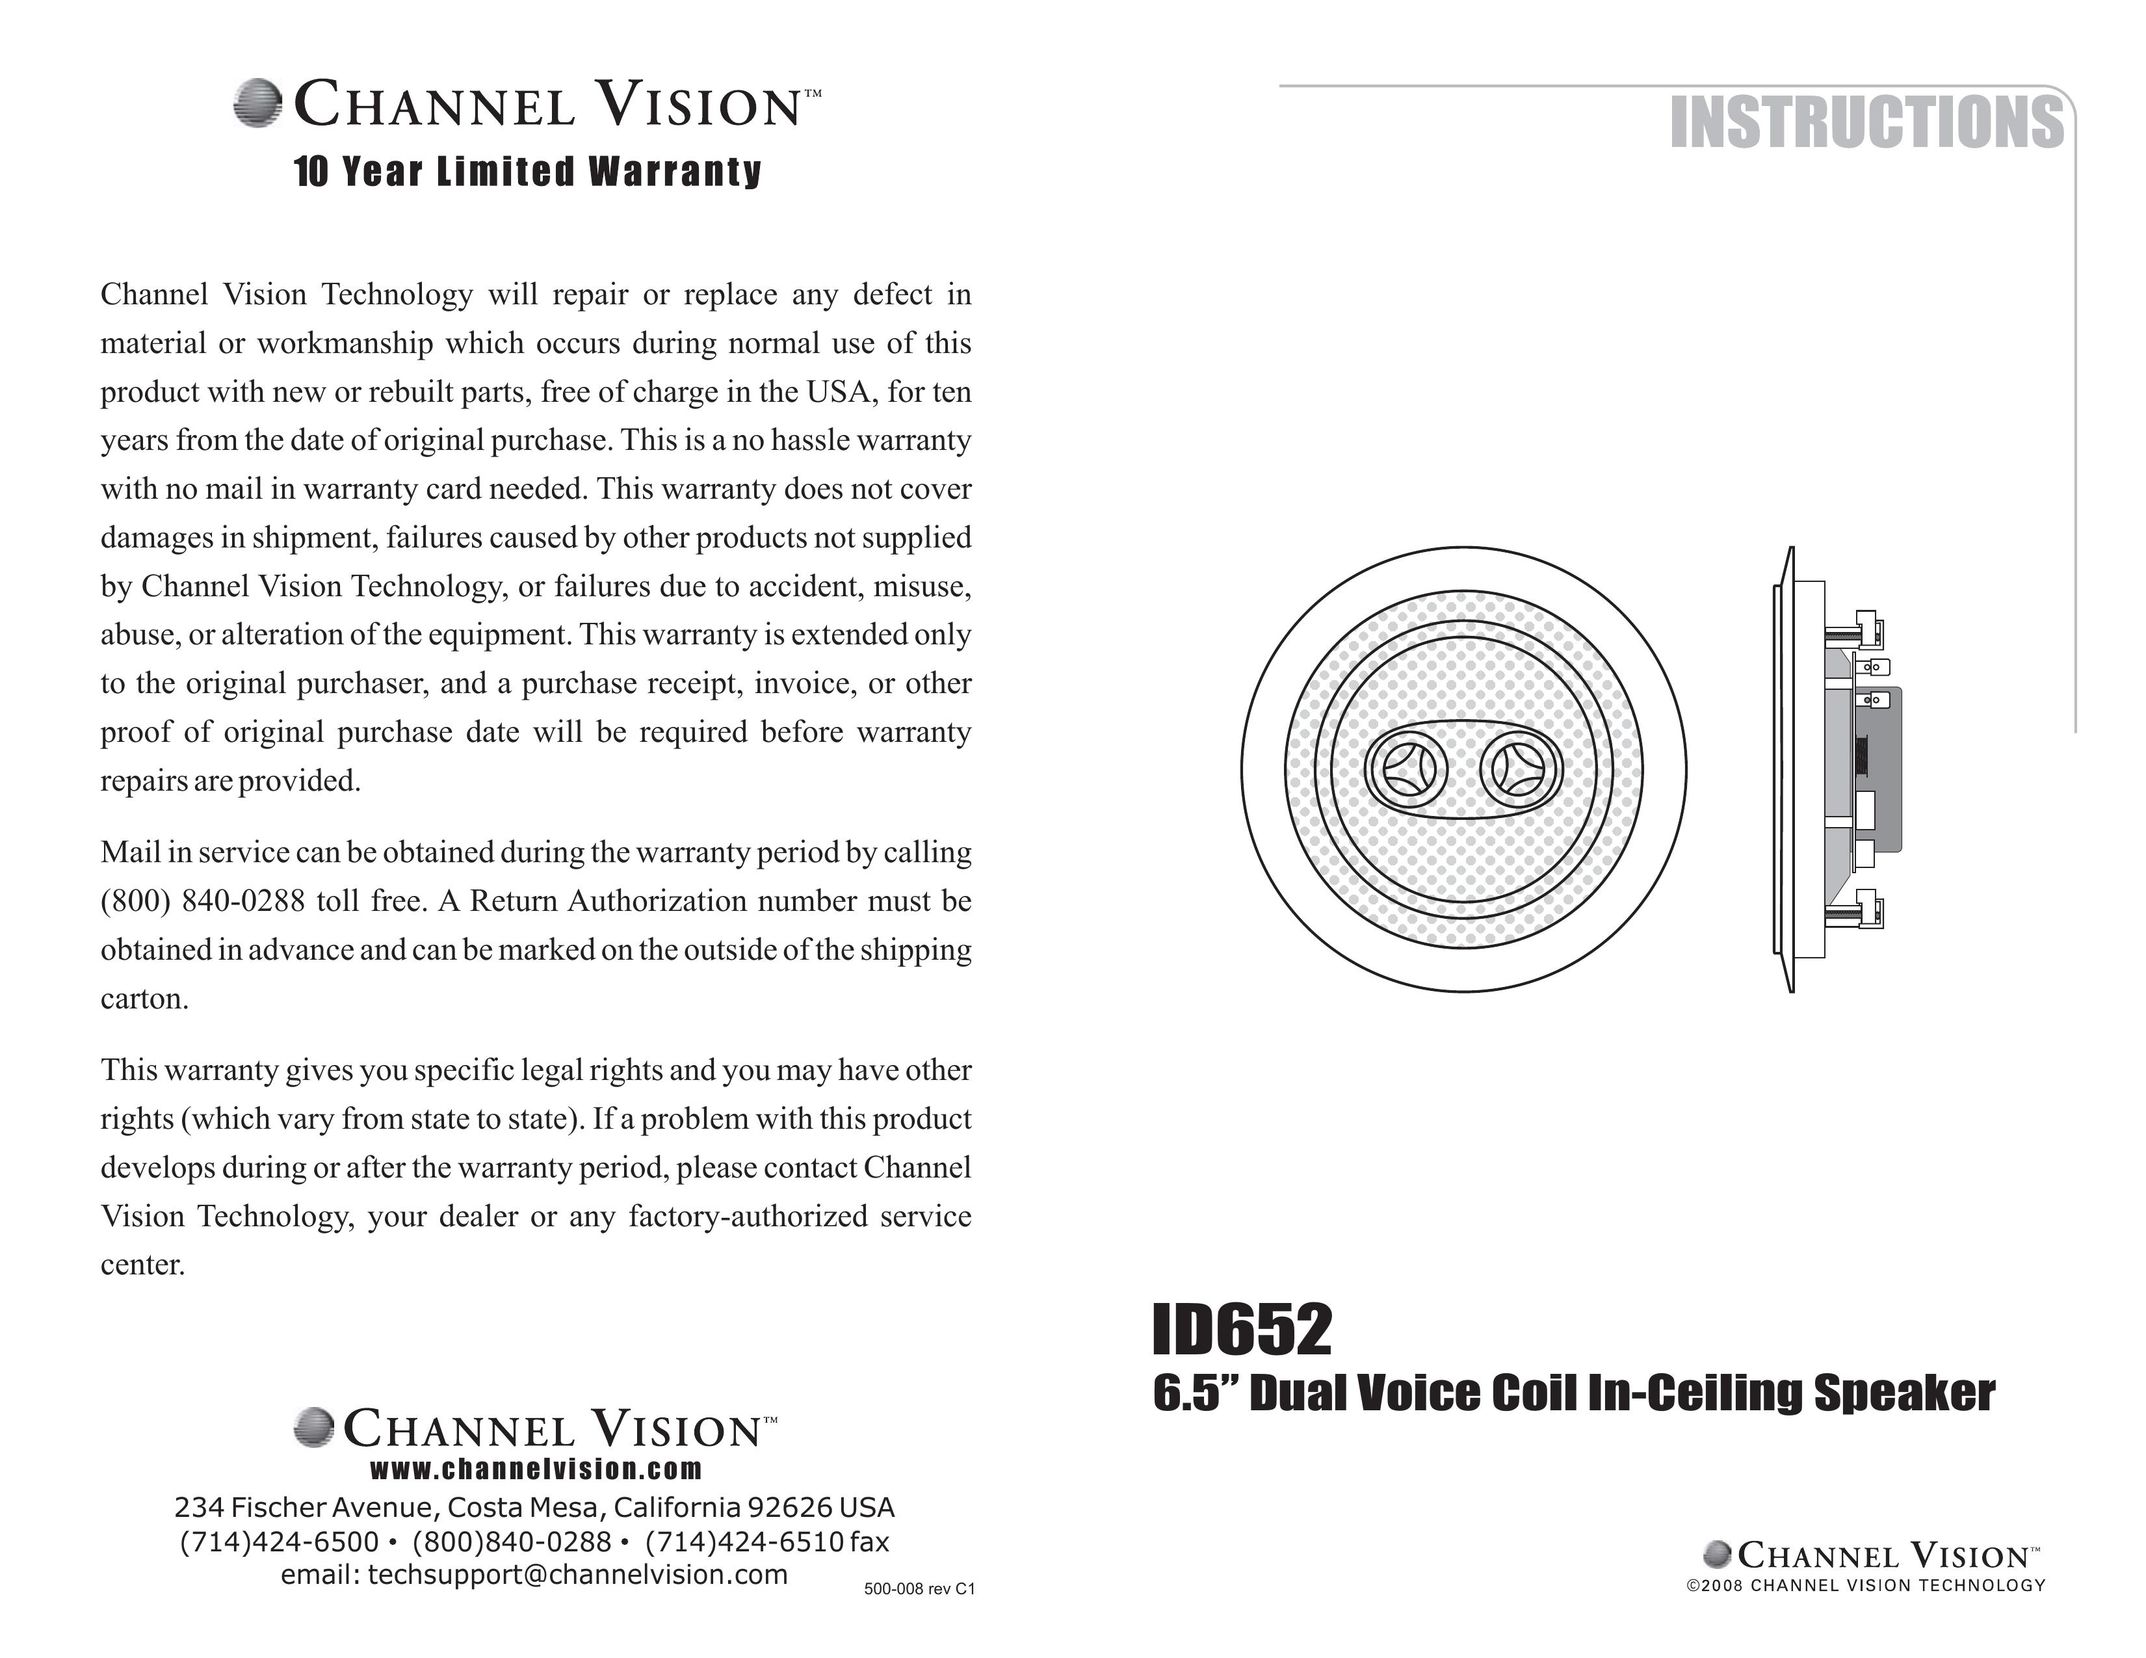 Channel Vision ID652 Portable Speaker User Manual